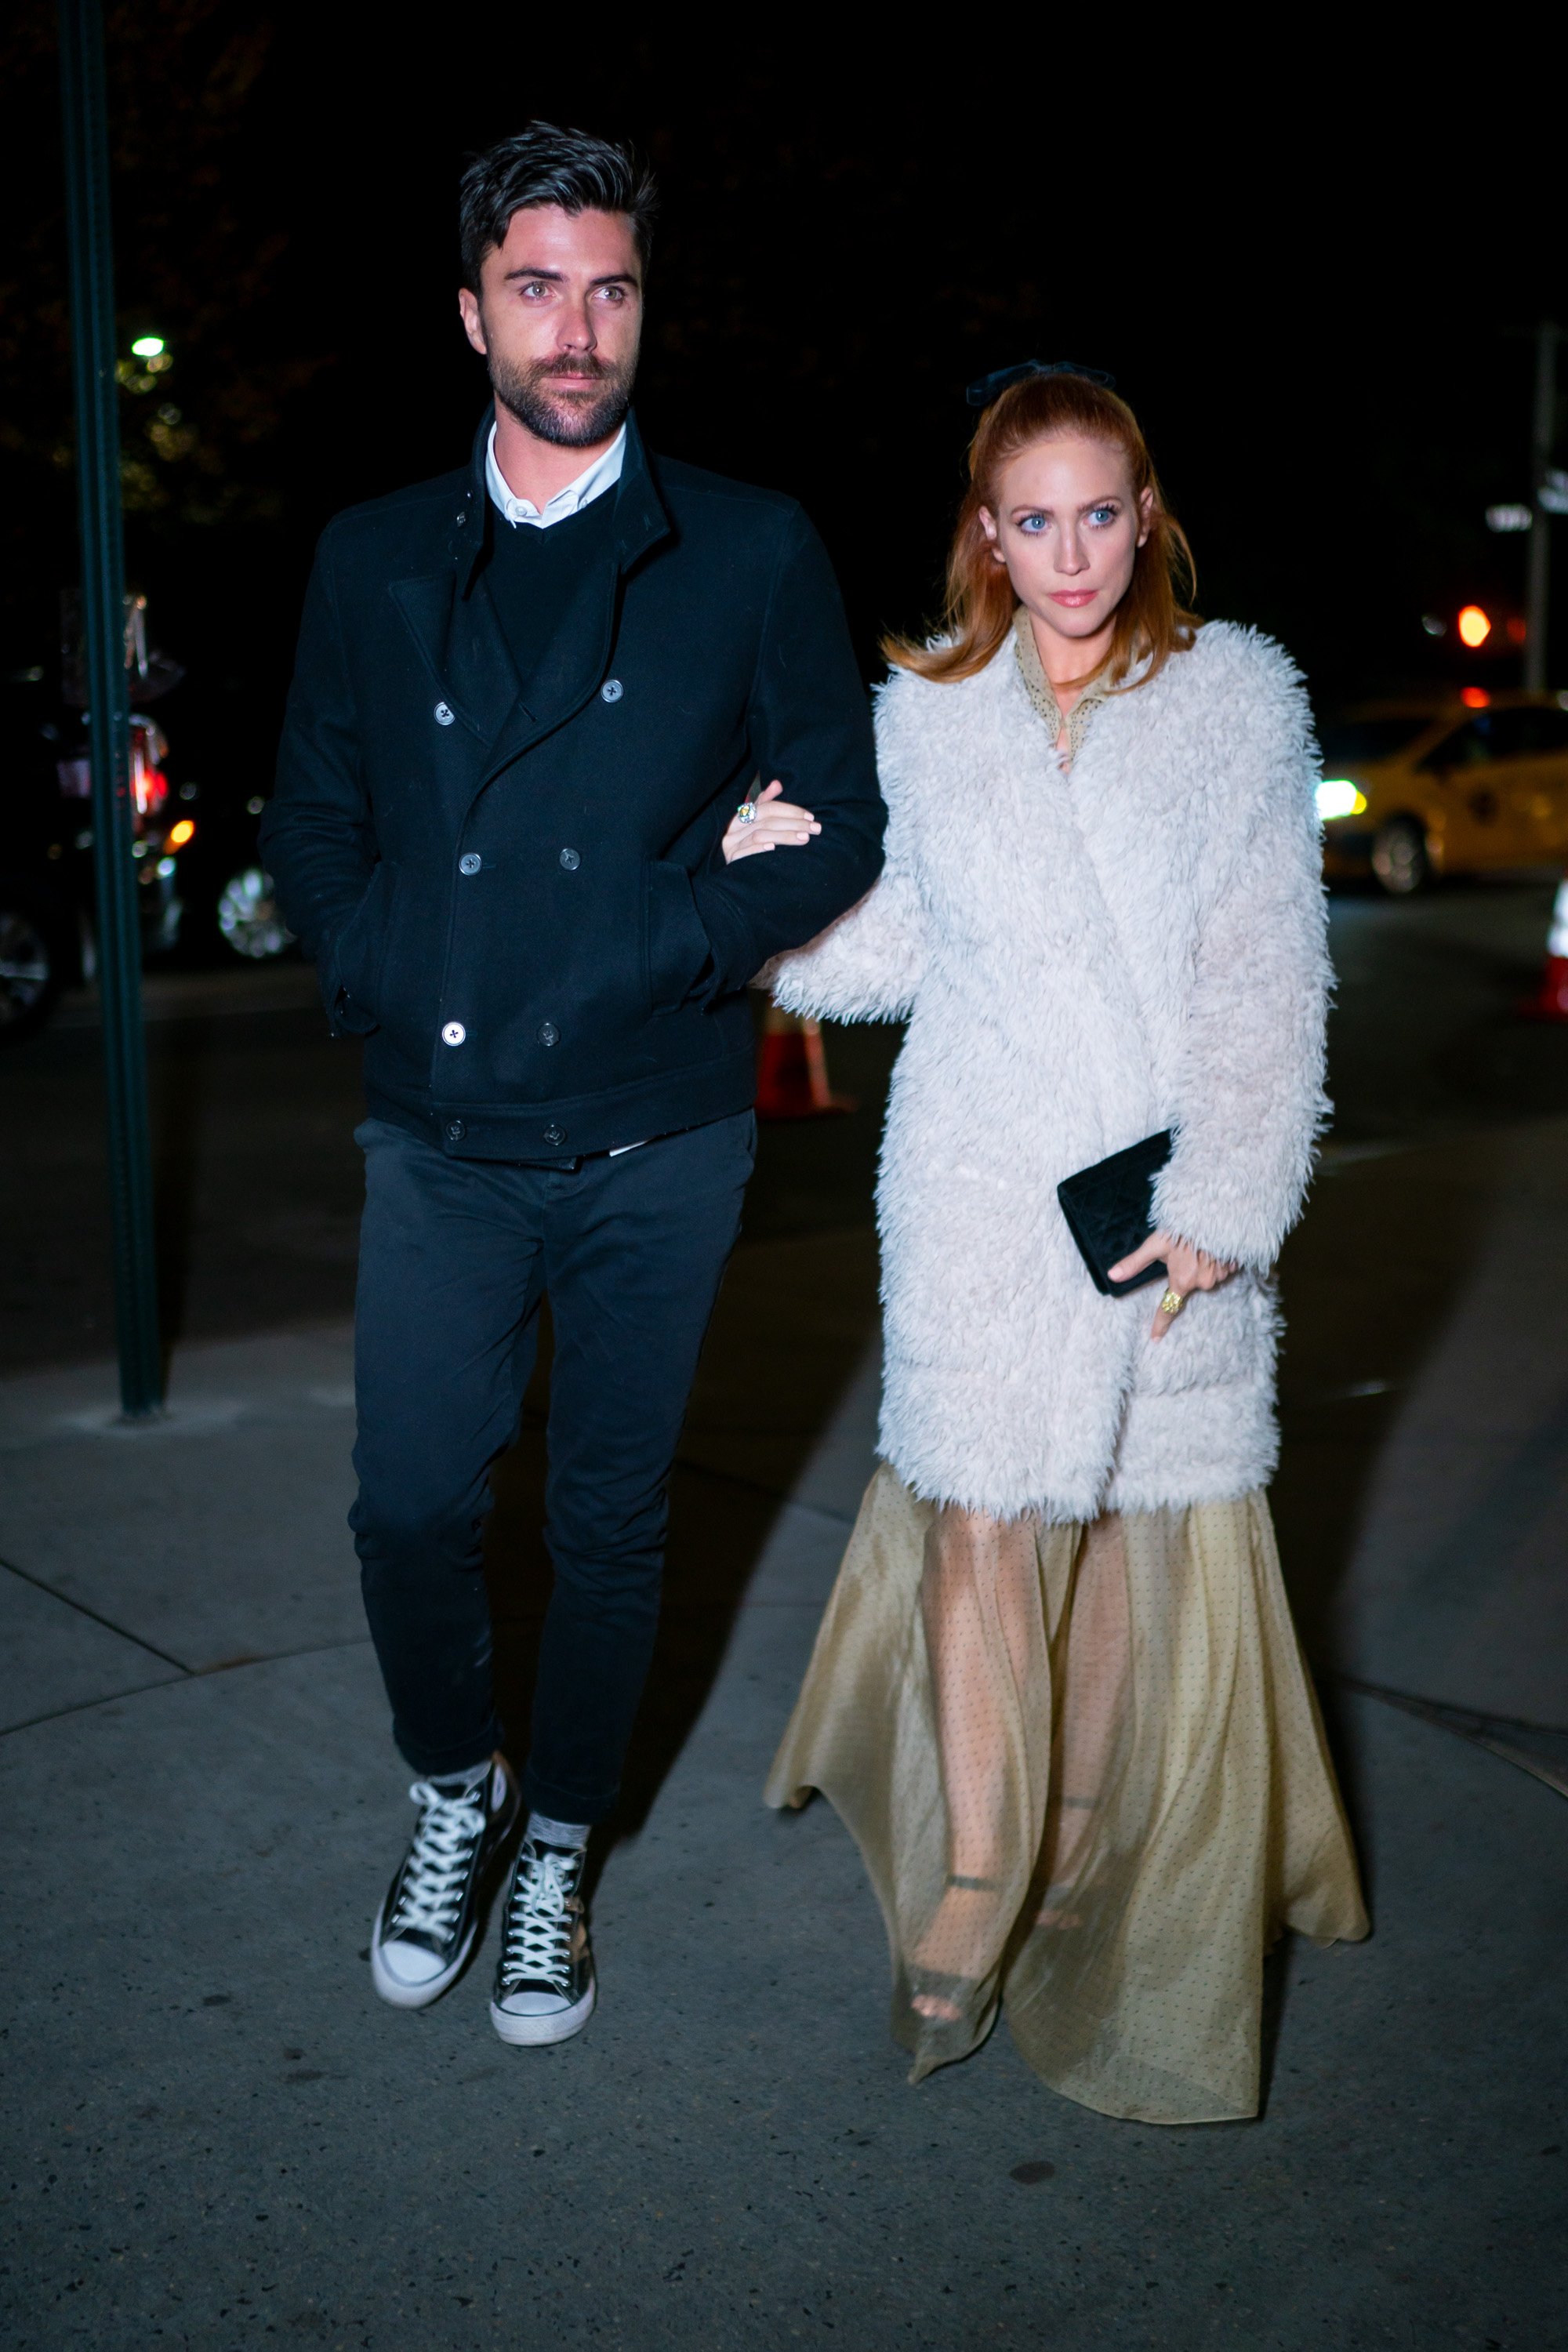 Tyler Stanaland and Brittany Snow photographed as they arrive at the 2019 Guggenheim International Gala in New York City, on November 13, 2019 | Source: Getty Images